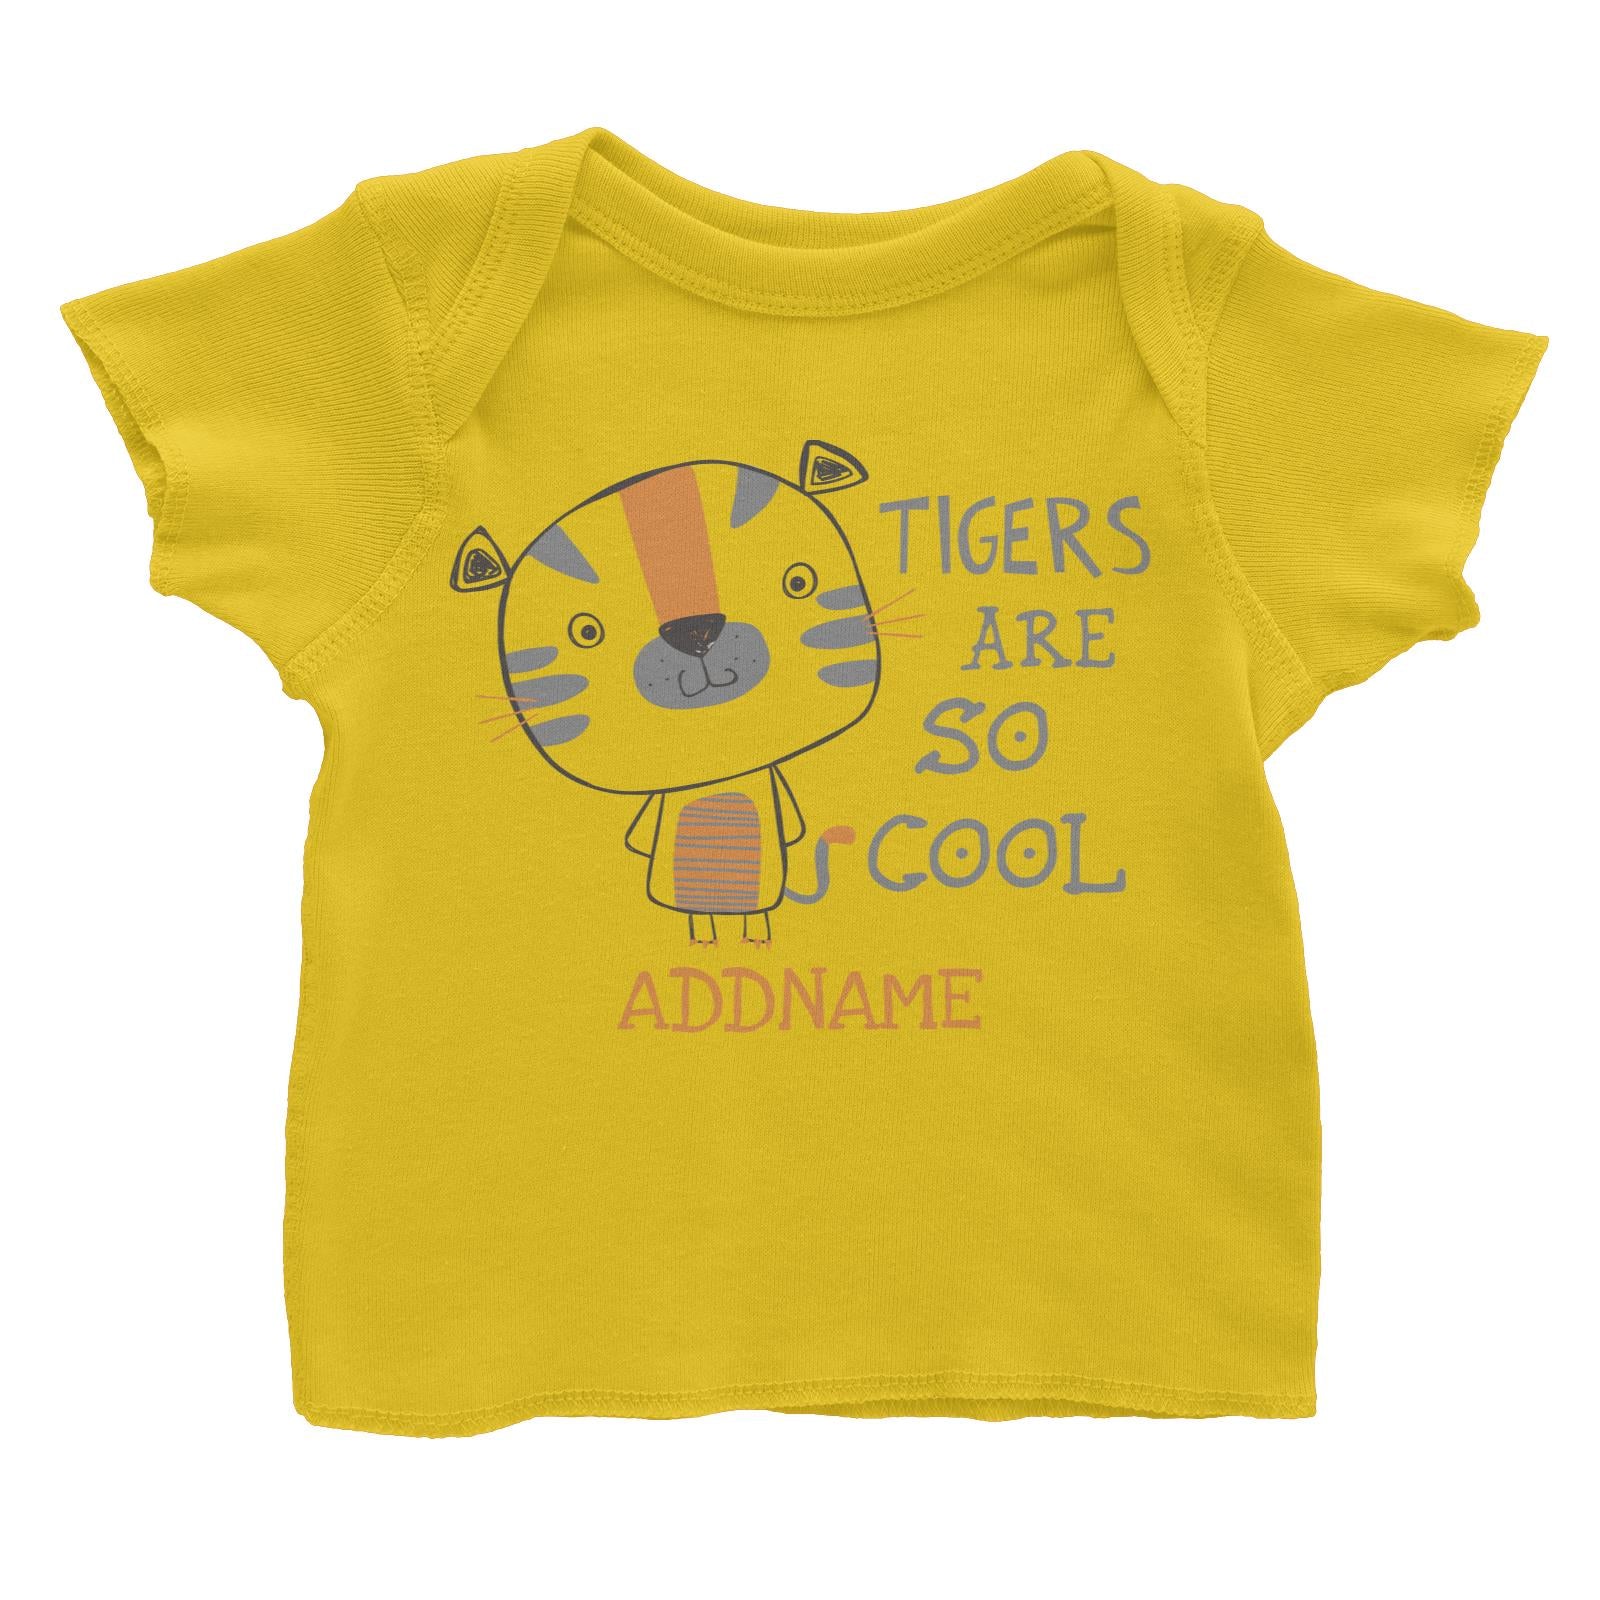 Tigers Are So Cool Addname Baby T-Shirt